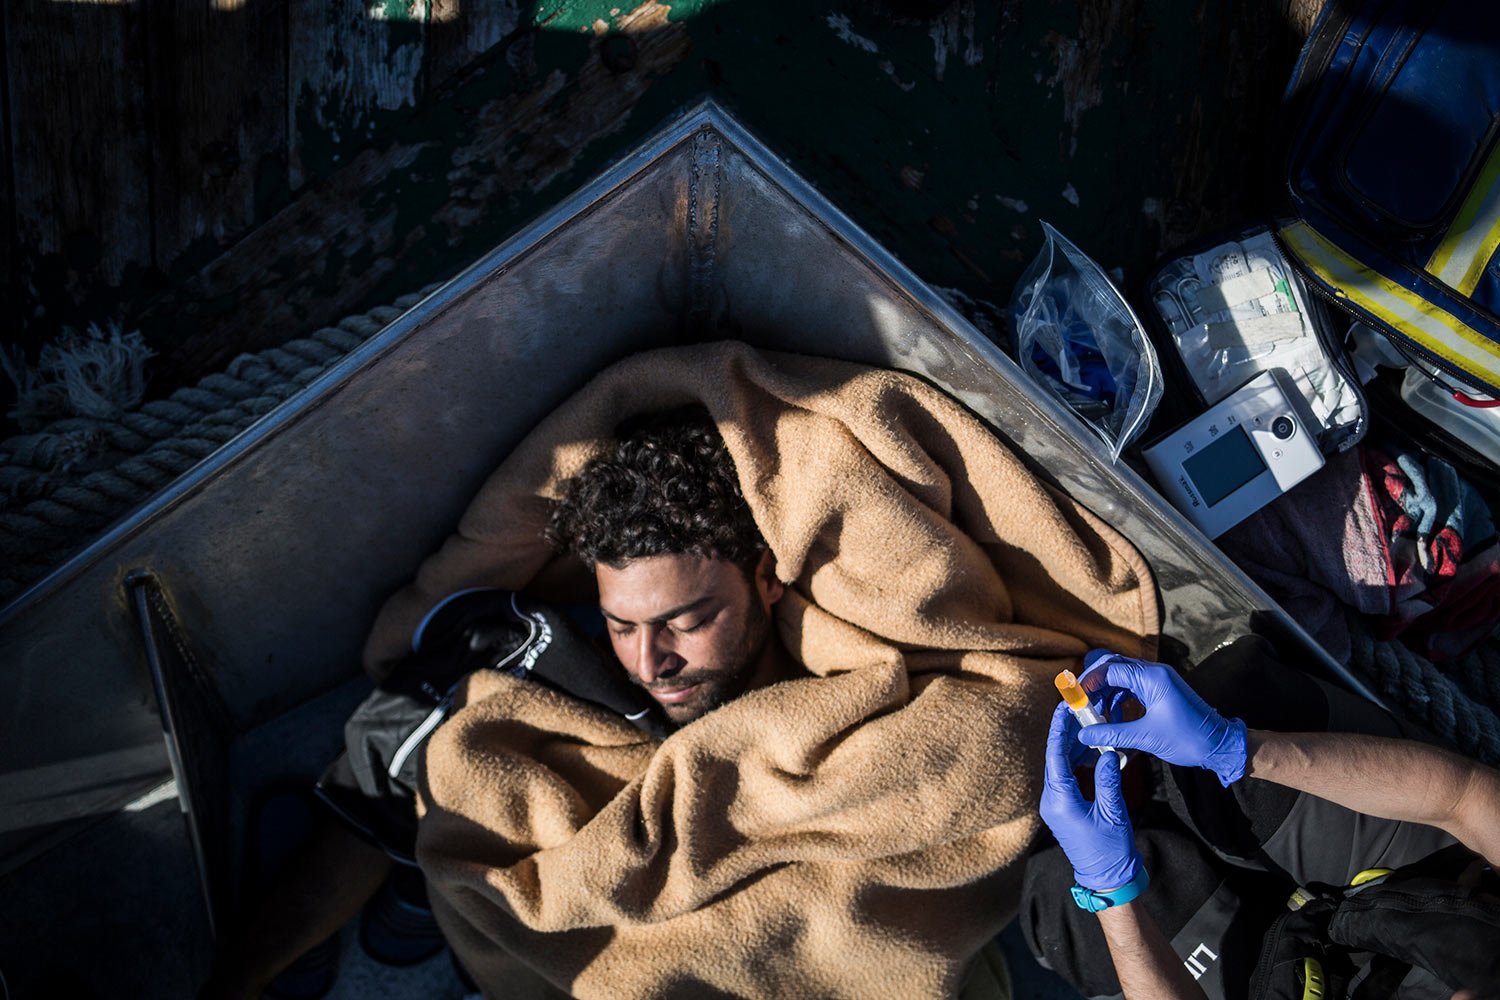  A sick migrant from Egypt is given medical treatment on the deck of the Nuestra Madre de Loreto Spanish fishing vessel carrying 12 migrants rescued off the coast of Libya, Nov. 30, 2018. (AP Photo/Javier Fergo) 